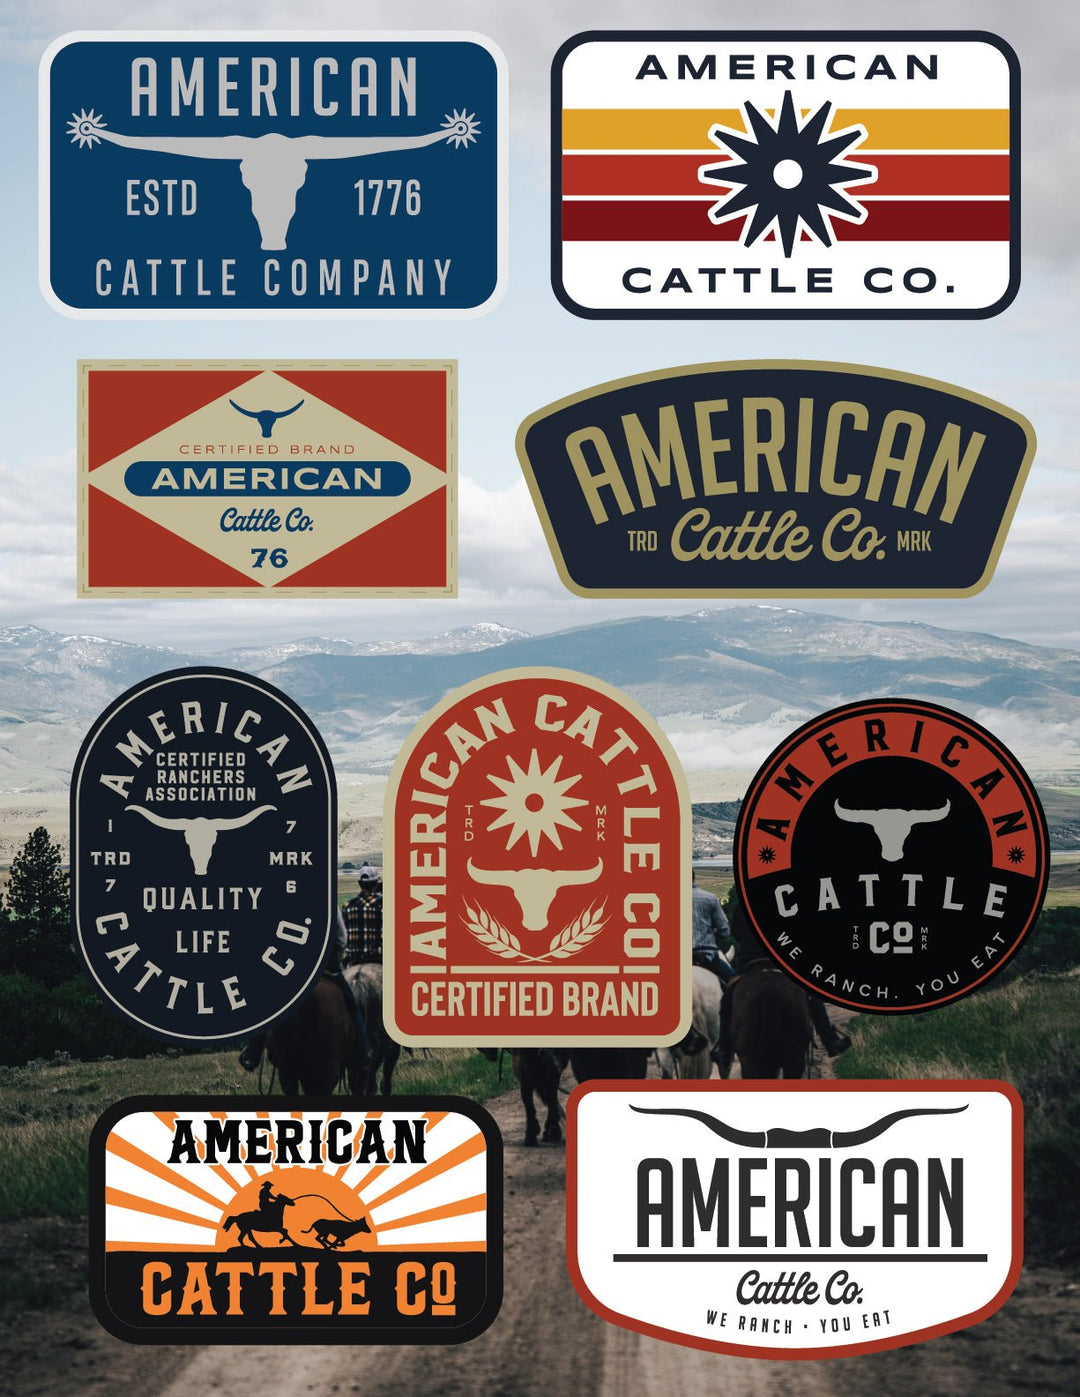 Image showcasing a collection of logos from the "American Cattle Co Decal Sheet" by Rural Cloth. Each logo presents unique designs, color schemes, and fonts, often featuring motifs like stars, cattle, and western typography. The background depicts a scenic landscape with mountains and two people on horseback. This decal sheet is perfect for various applications.